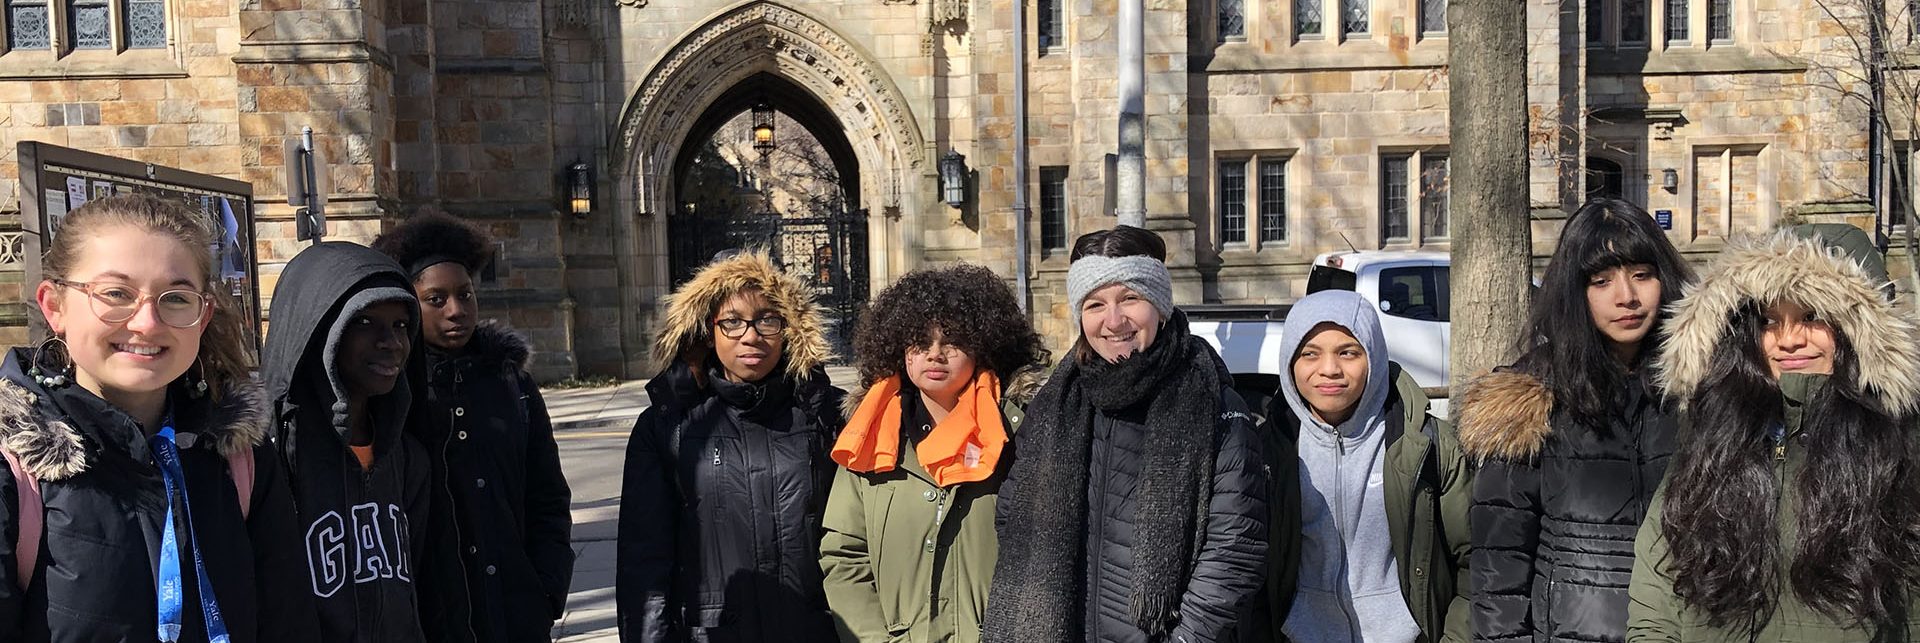 HEAF students tour the campus of Yale University